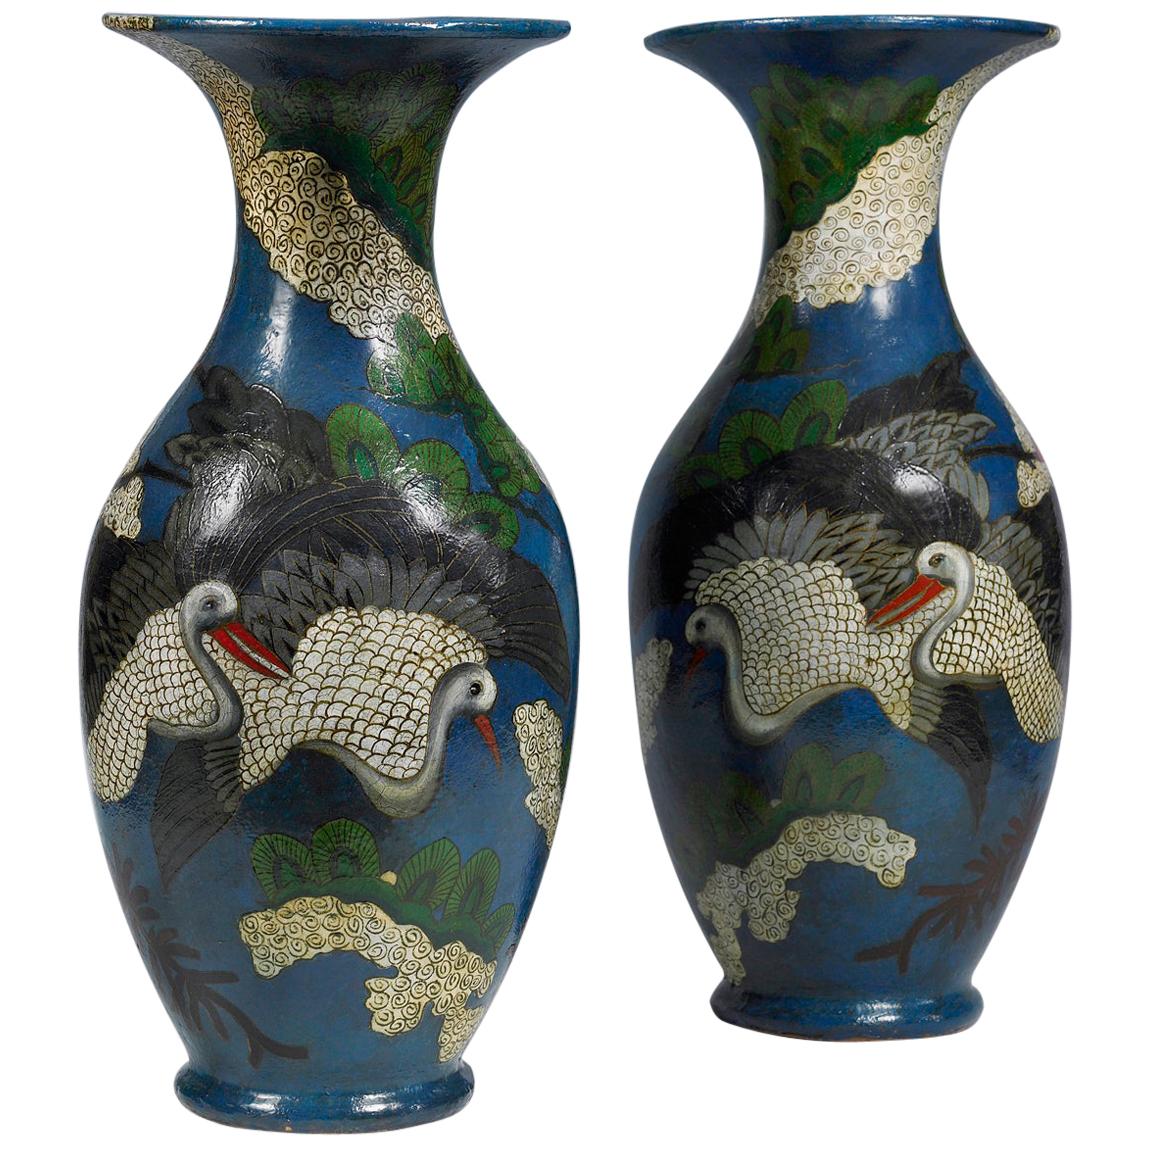 Italy Mid-18th Century Pair of Lacquered Blue Vases with Herons and Flowers